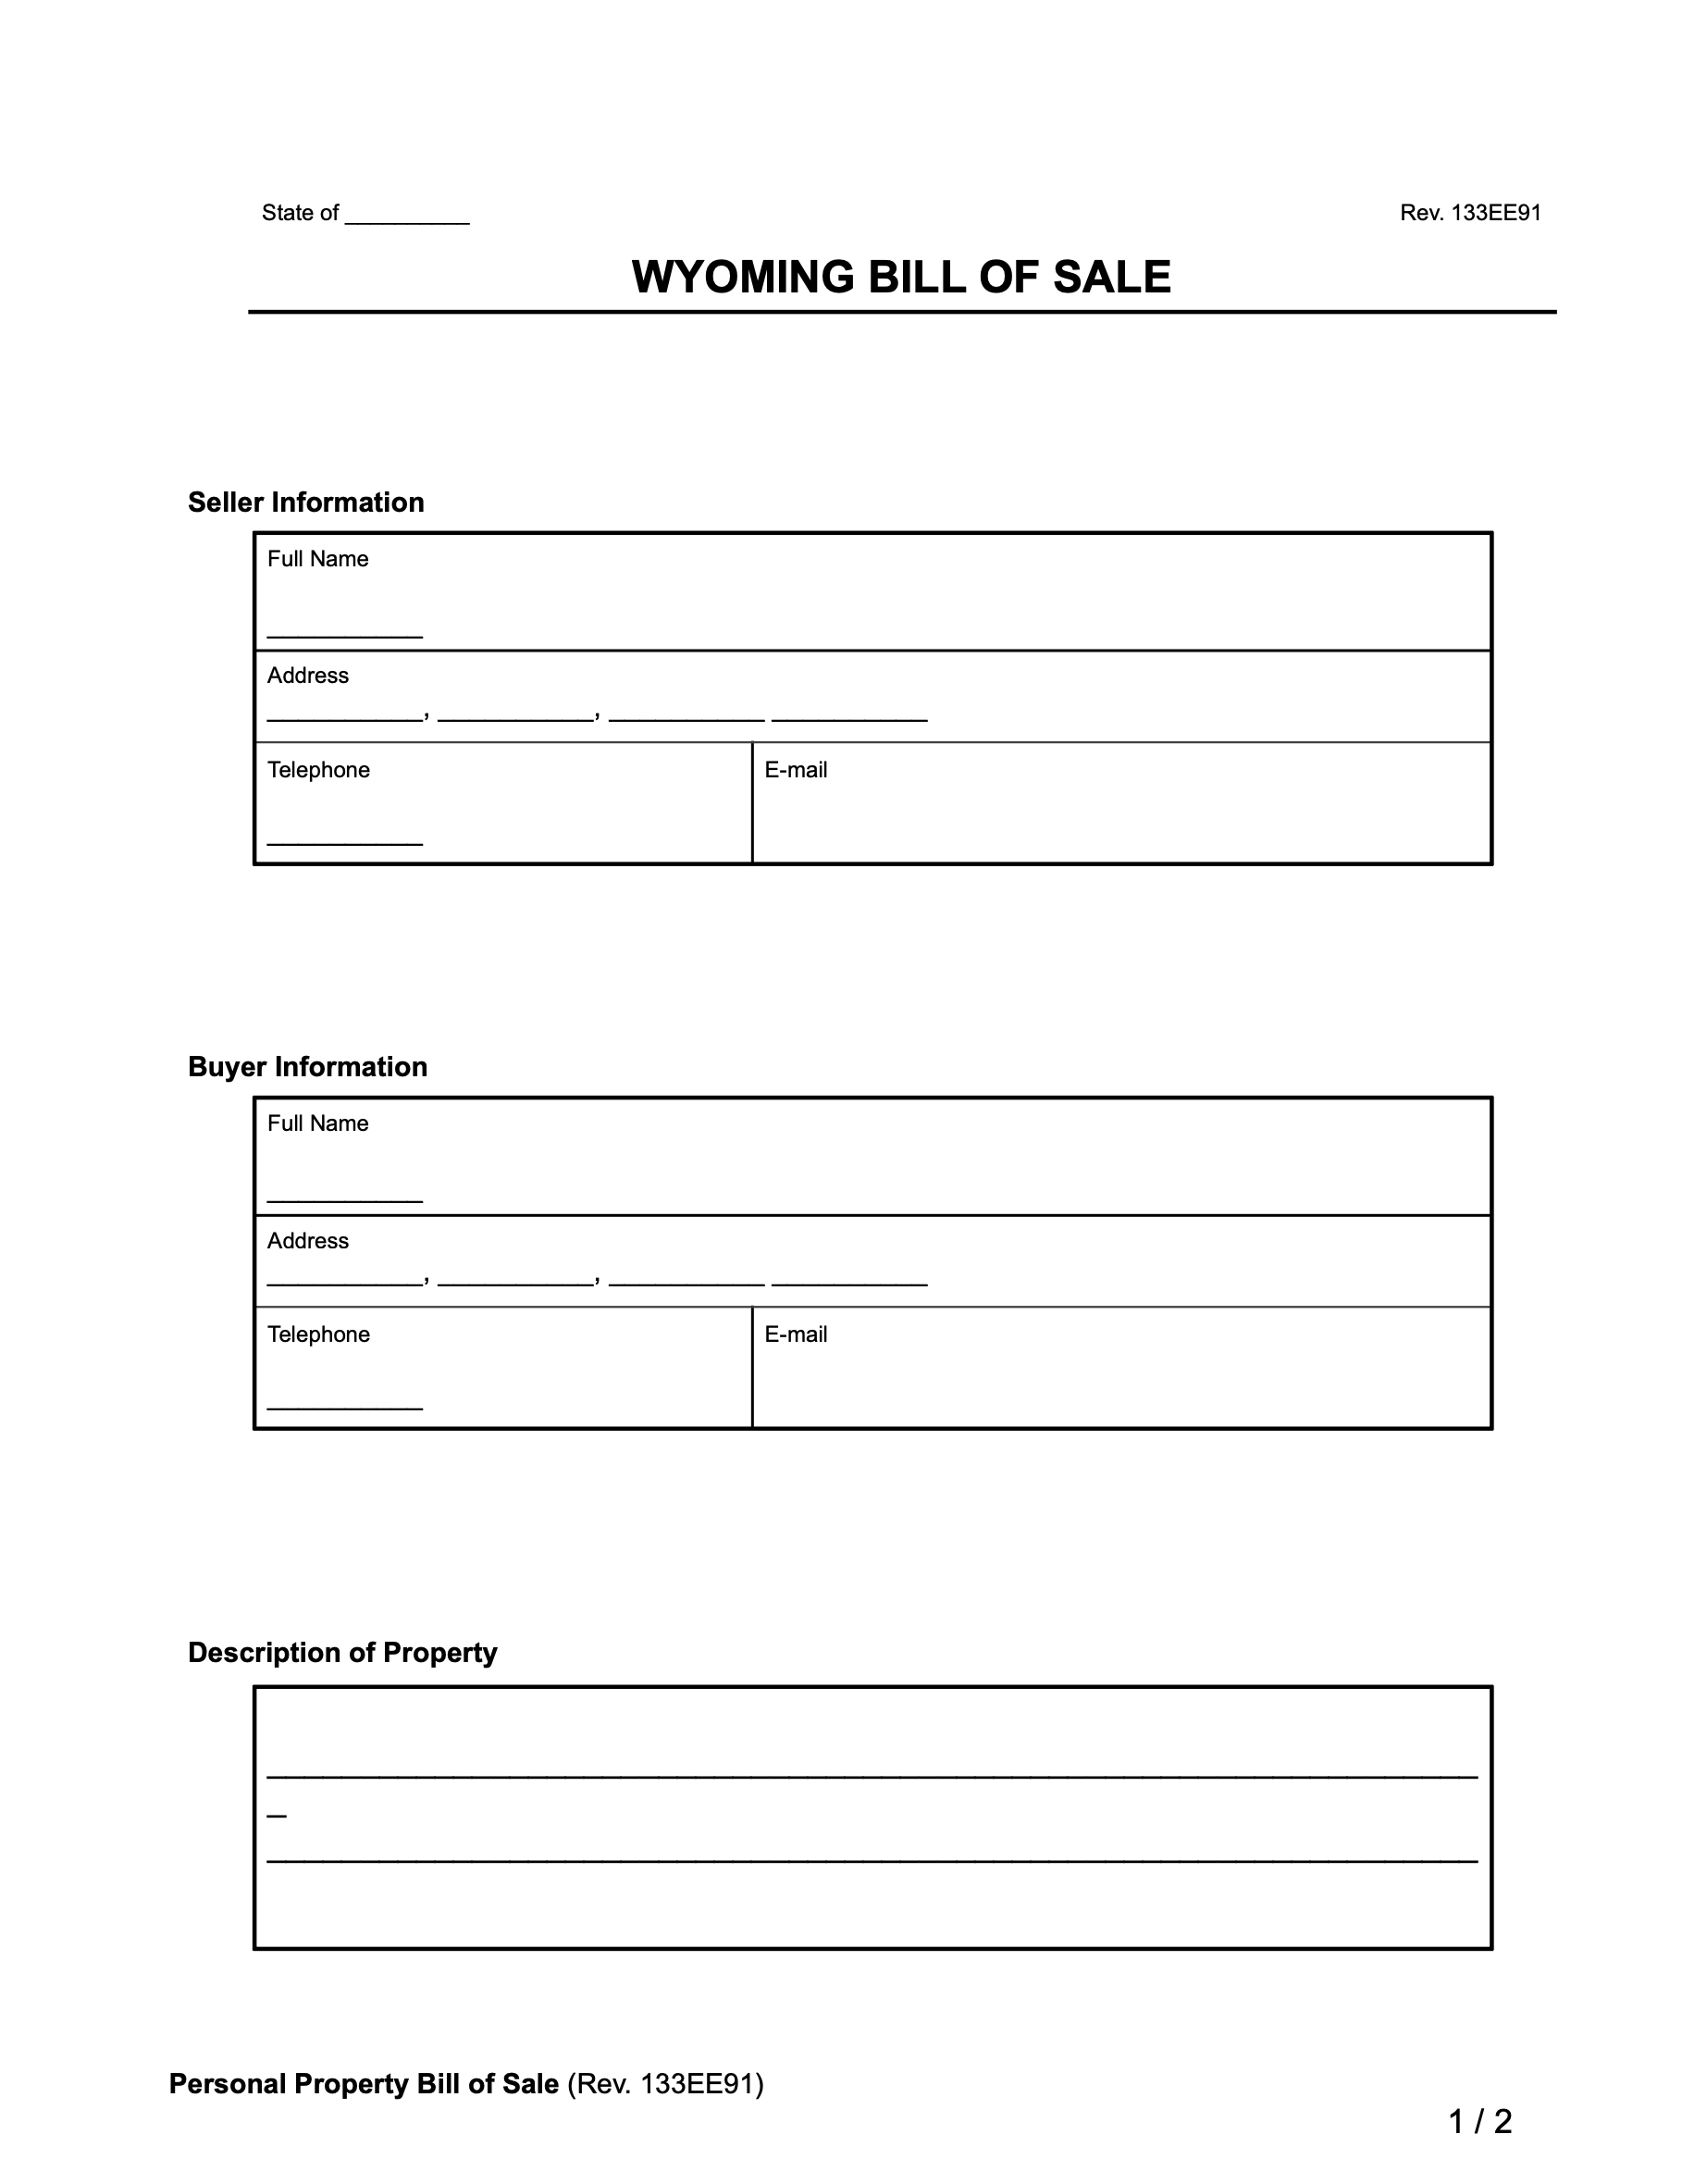 wyoming bill of sale form